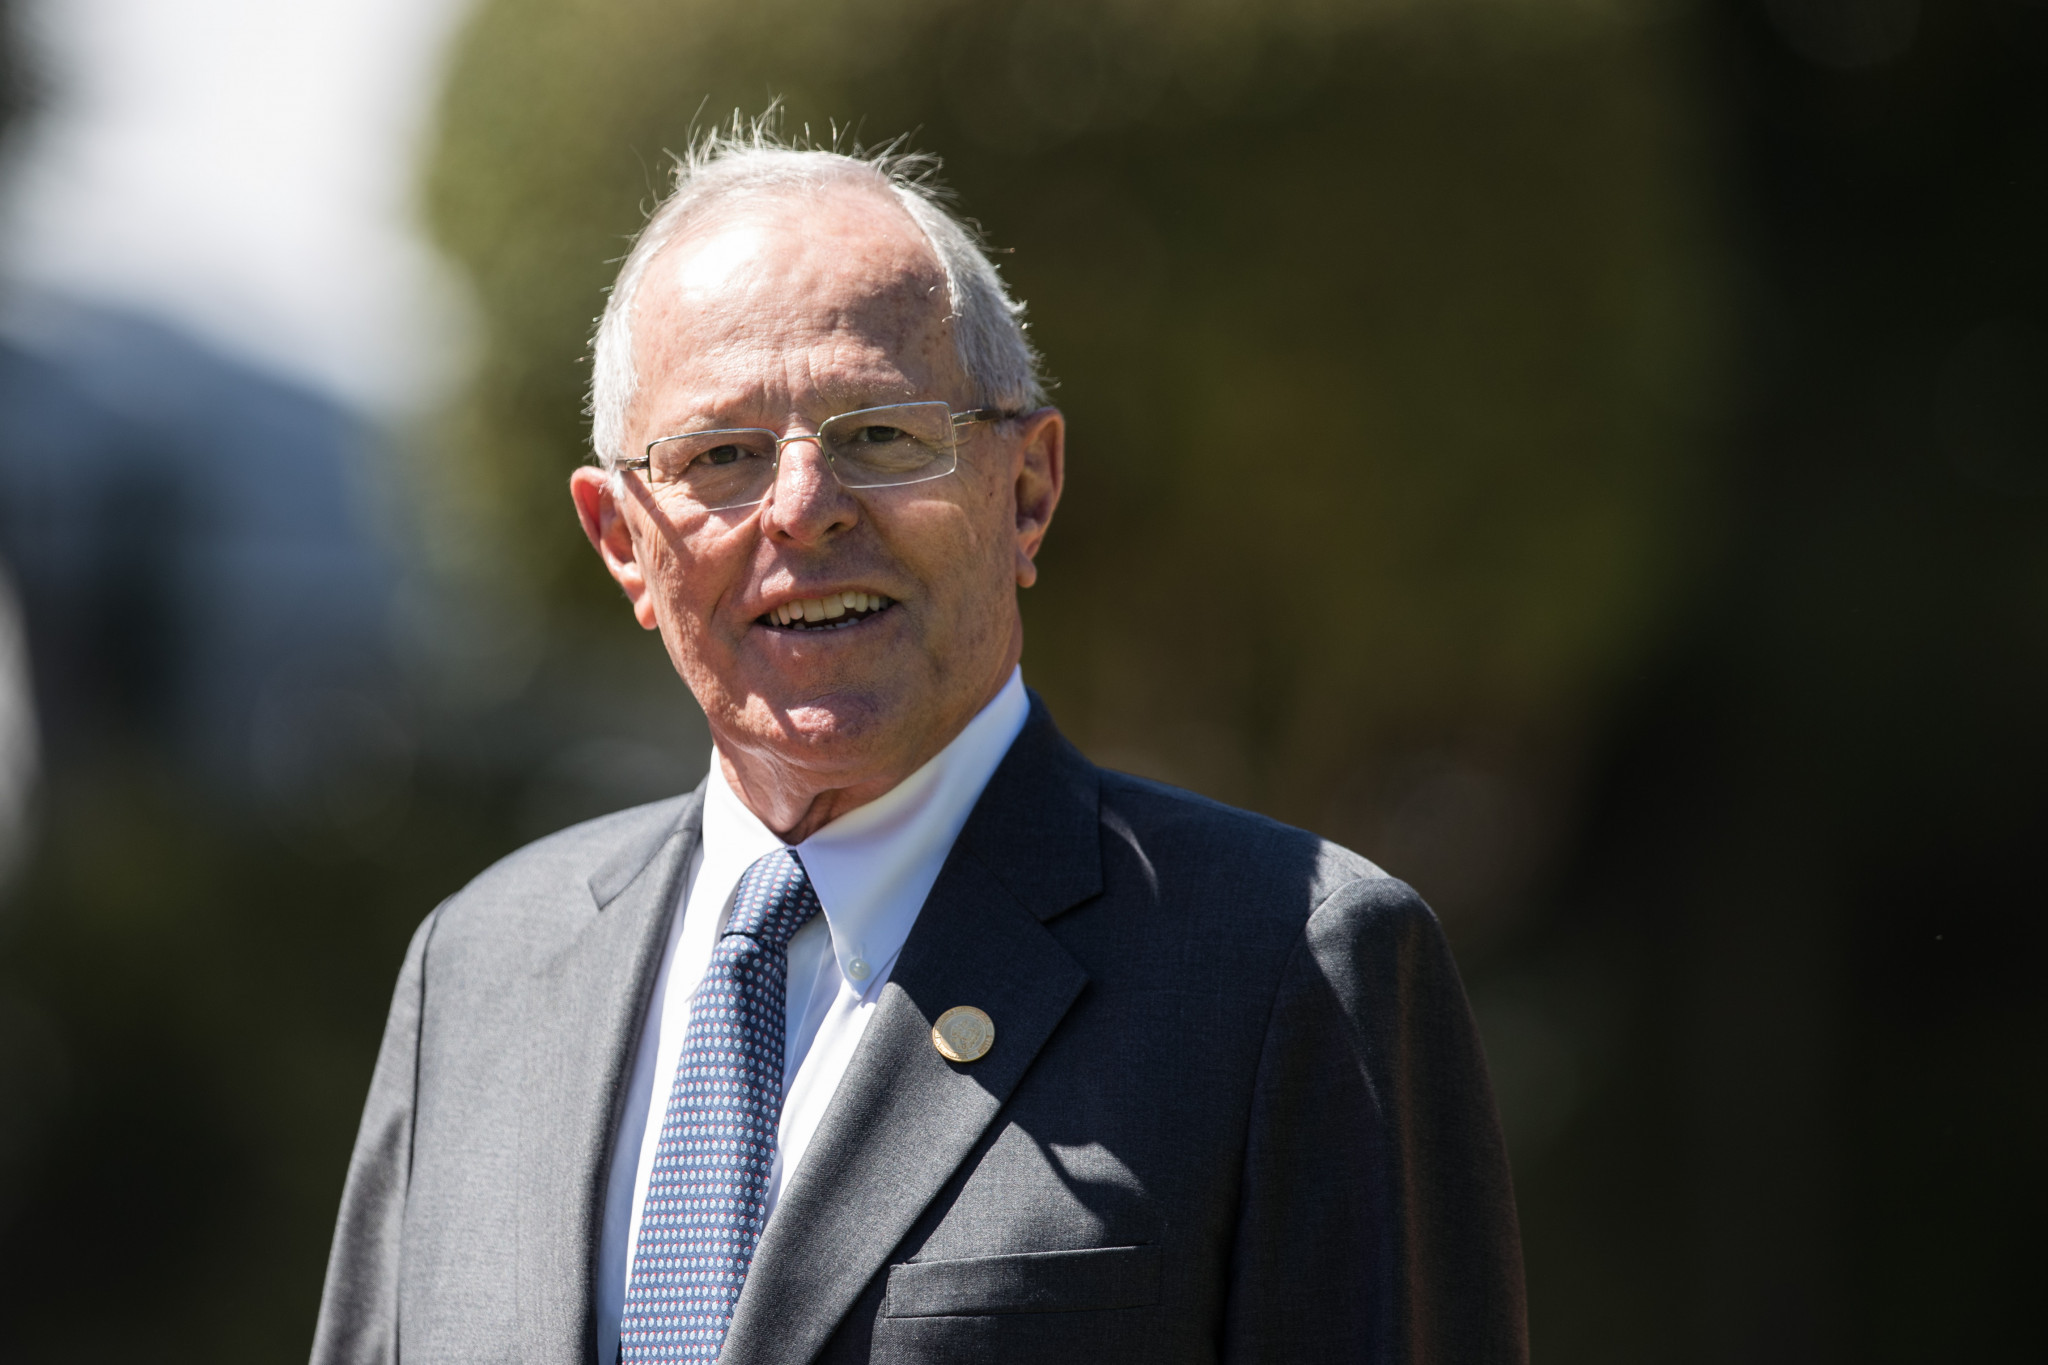 Peru's President Pedro Pablo Kuczynski is currently facing impeachment proceedings ©Getty Images